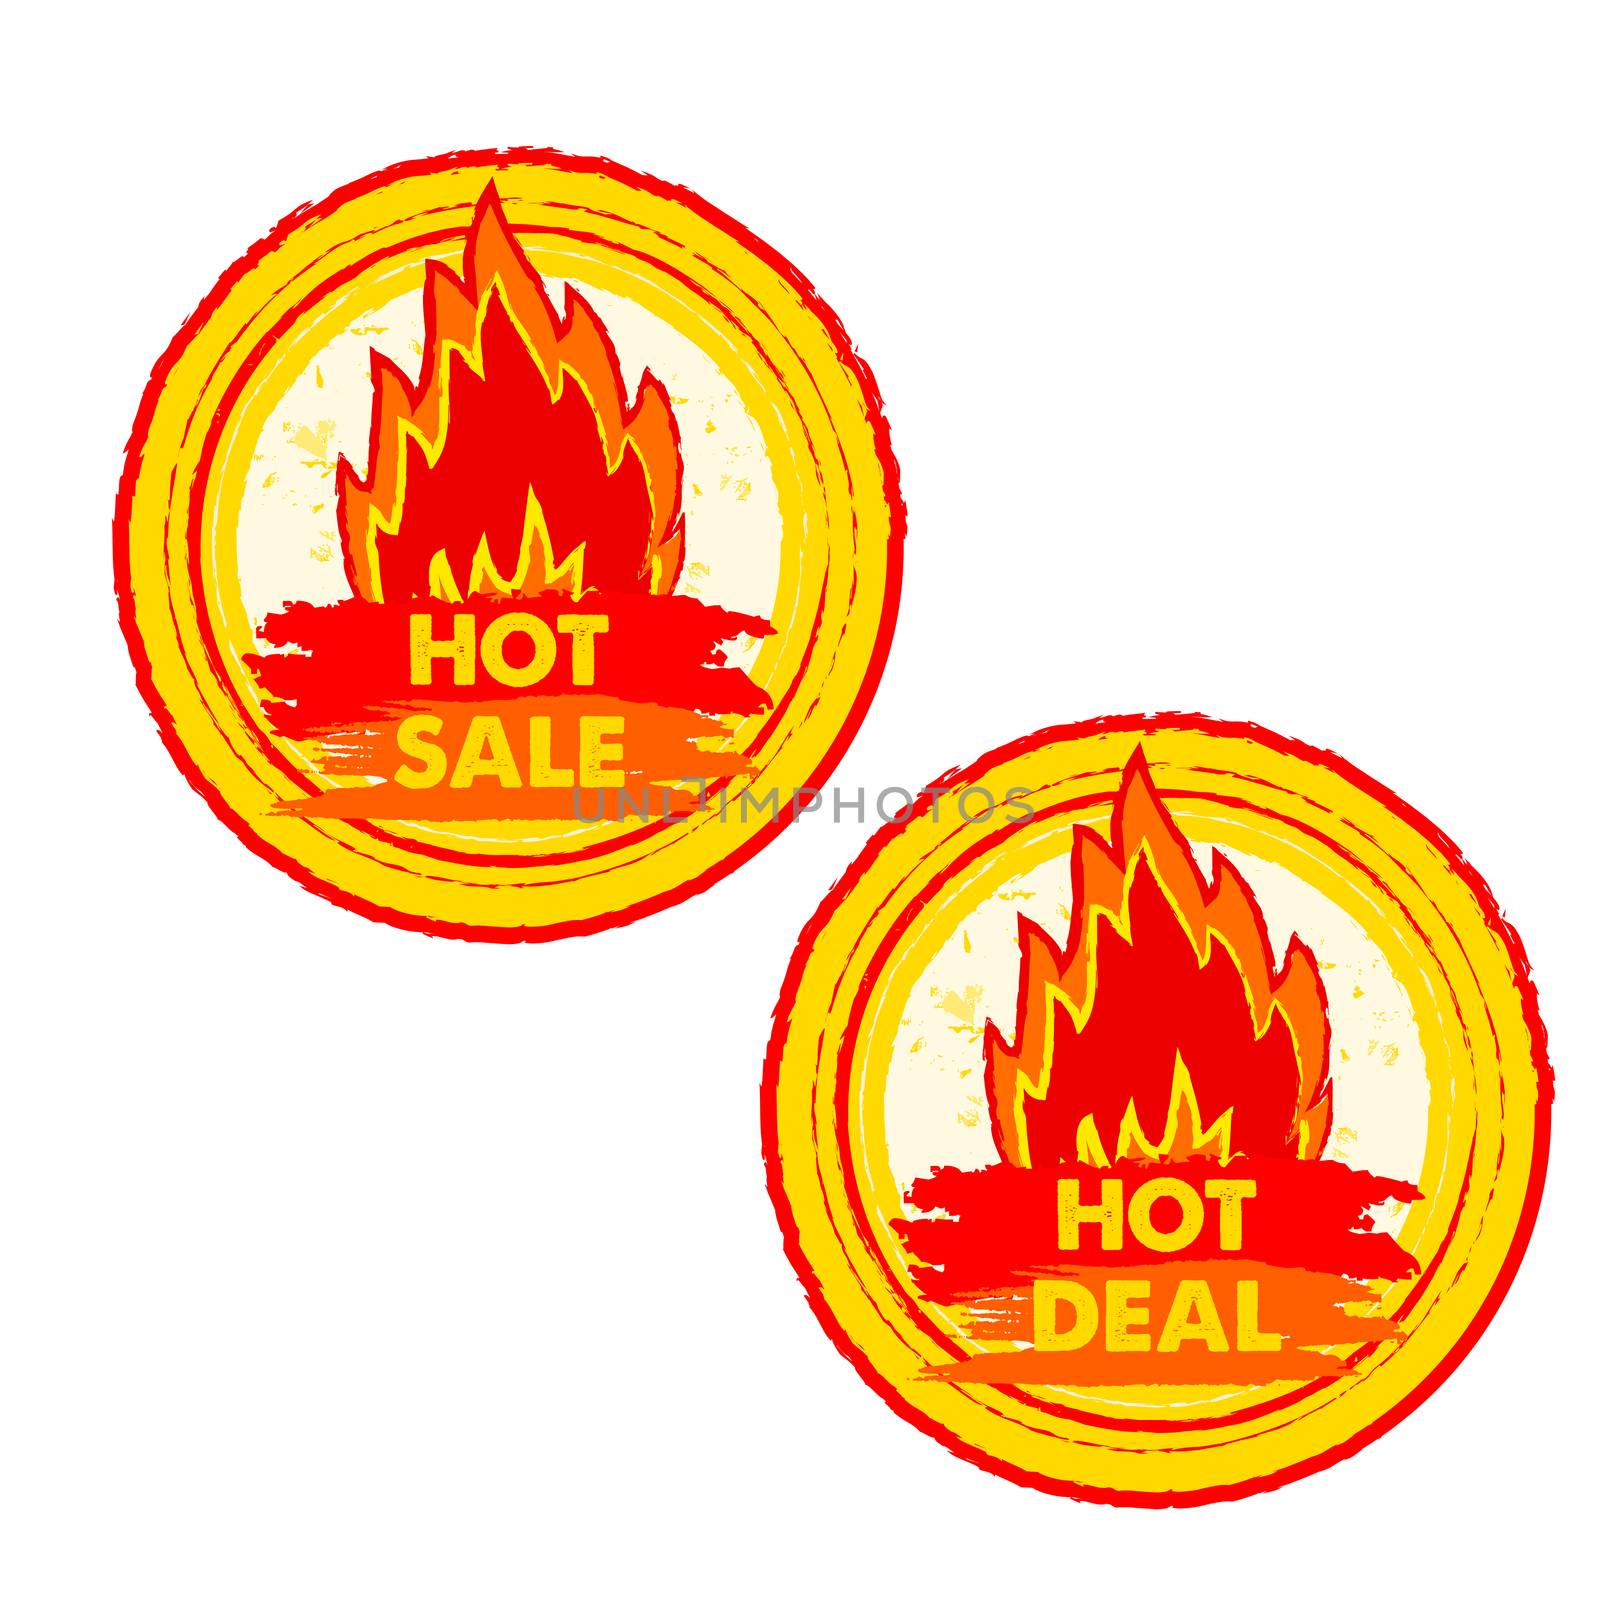 hot sale and deal on fire, yellow and red drawn round labels wit by marinini